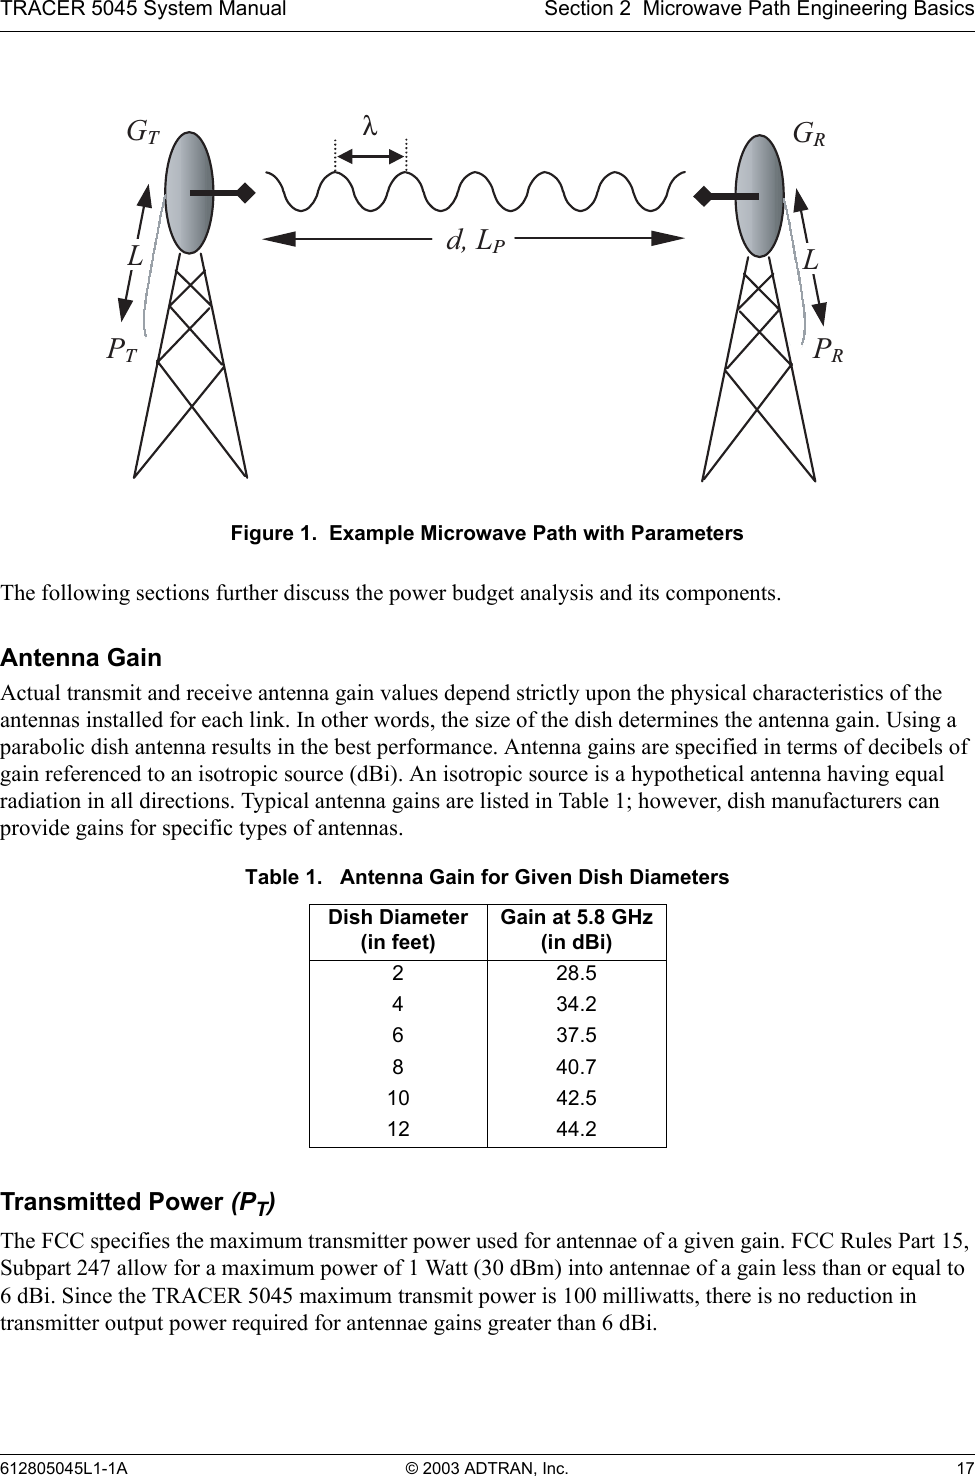 TRACER 5045 System Manual Section 2  Microwave Path Engineering Basics612805045L1-1A © 2003 ADTRAN, Inc. 17Figure 1.  Example Microwave Path with ParametersThe following sections further discuss the power budget analysis and its components.Antenna GainActual transmit and receive antenna gain values depend strictly upon the physical characteristics of the antennas installed for each link. In other words, the size of the dish determines the antenna gain. Using a parabolic dish antenna results in the best performance. Antenna gains are specified in terms of decibels of gain referenced to an isotropic source (dBi). An isotropic source is a hypothetical antenna having equal radiation in all directions. Typical antenna gains are listed in Table 1; however, dish manufacturers can provide gains for specific types of antennas.Transmitted Power (PT)The FCC specifies the maximum transmitter power used for antennae of a given gain. FCC Rules Part 15, Subpart 247 allow for a maximum power of 1 Watt (30 dBm) into antennae of a gain less than or equal to 6 dBi. Since the TRACER 5045 maximum transmit power is 100 milliwatts, there is no reduction in transmitter output power required for antennae gains greater than 6 dBi.Table 1.   Antenna Gain for Given Dish DiametersDish Diameter(in feet)Gain at 5.8 GHz(in dBi)228.5434.2637.5840.710 42.512 44.2 GTGRd, LPPTPRλLL